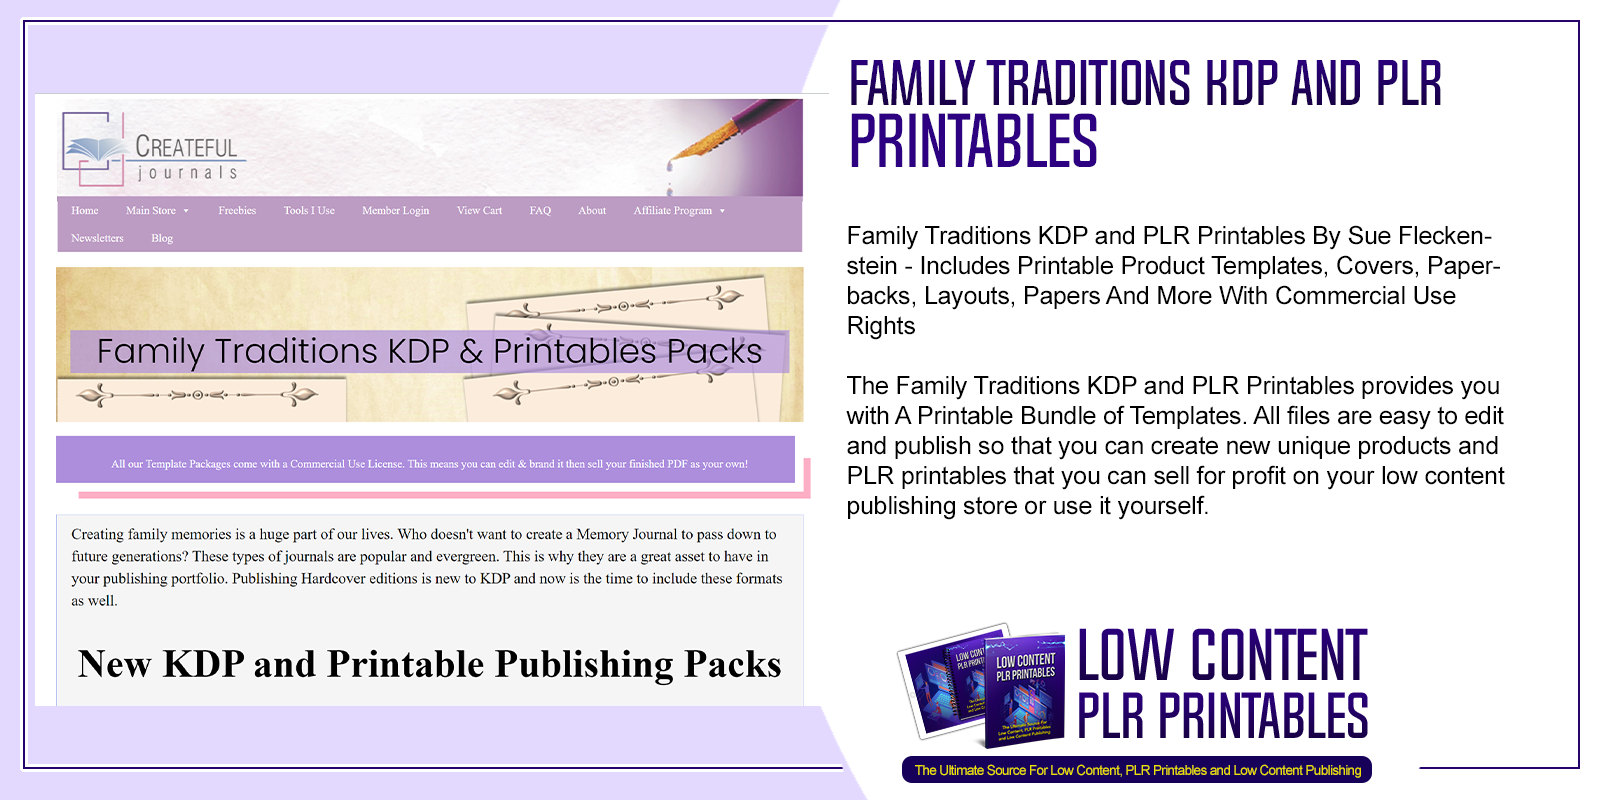 Family Traditions KDP and PLR Printables